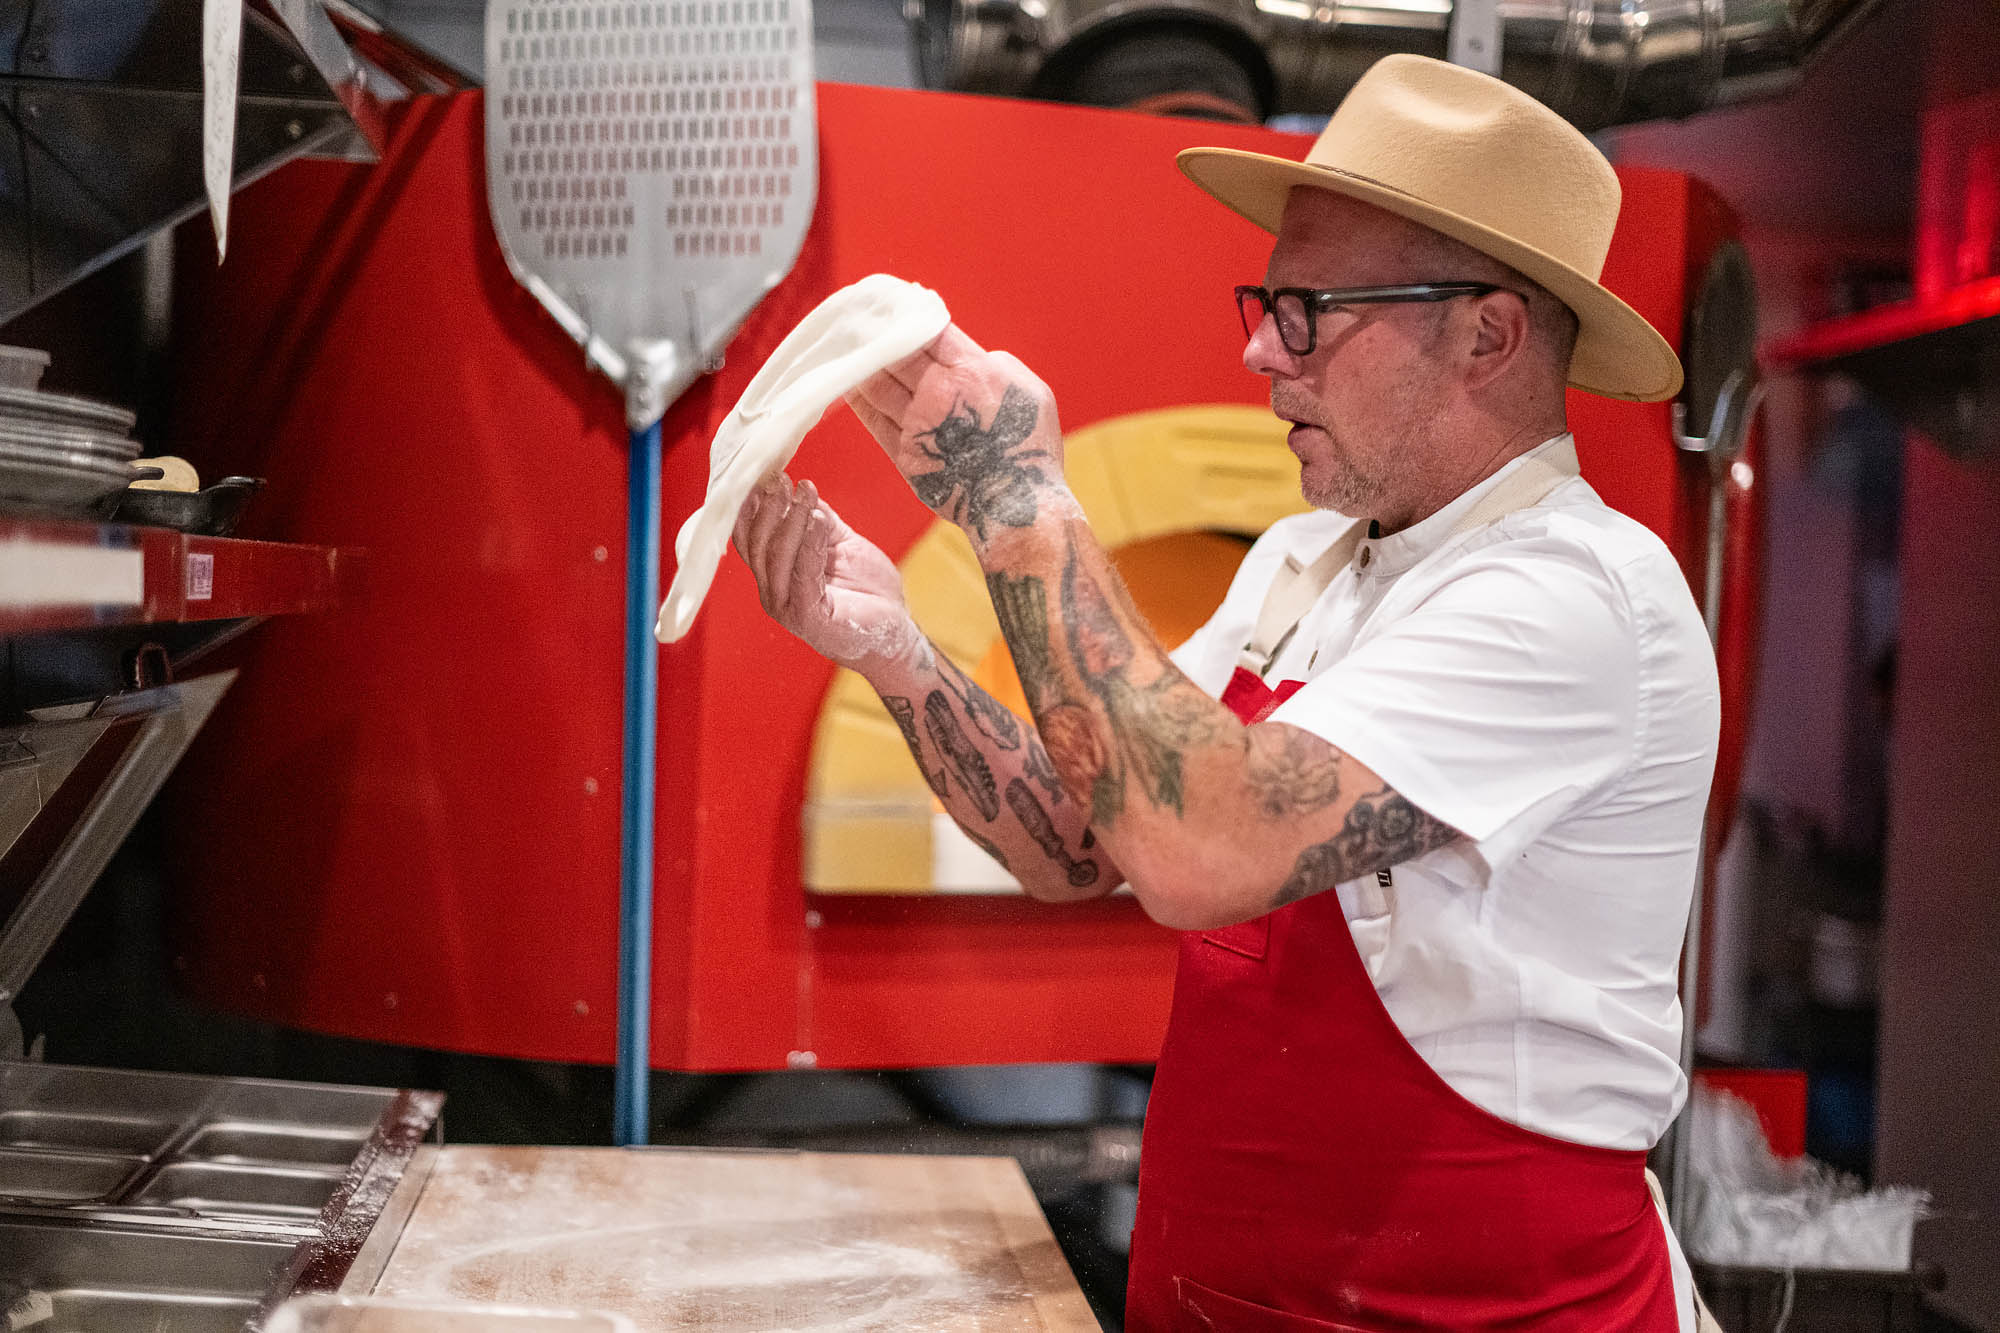 Jason Neroni, wearing glasses and a hat, stretches pizza dough at his new restaurant Best Bet in Culver City with a red pizza oven behind him.